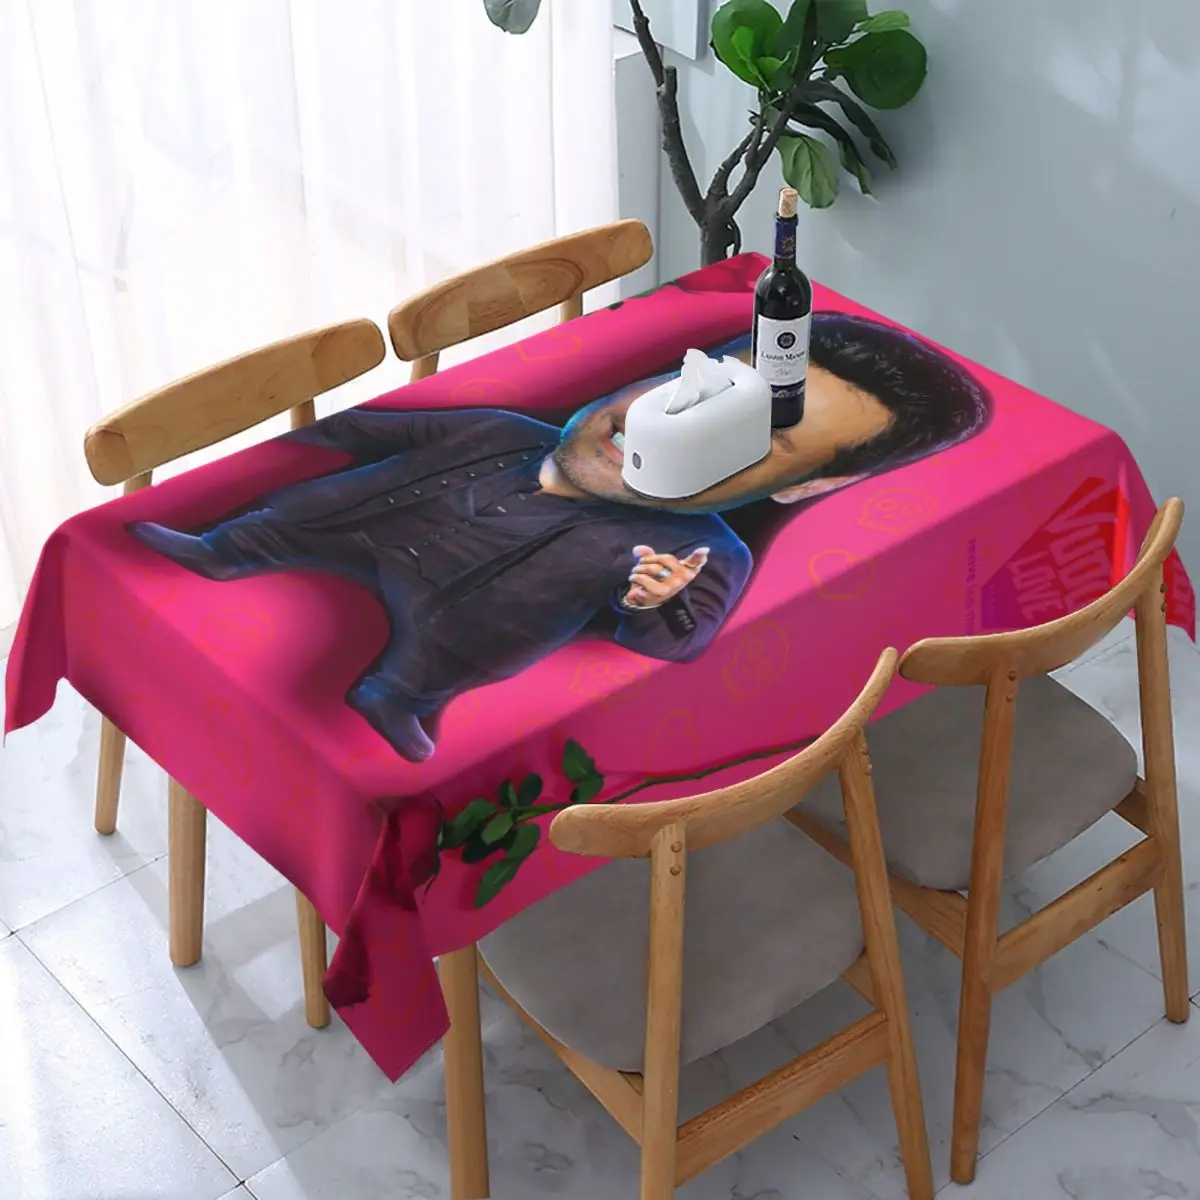 

Rectangular Waterproof Oil-Proof Chayanne Chiquito Meme Tablecloth Backed Elastic Edge Table Covers 40"-44" Fit Table Cloth